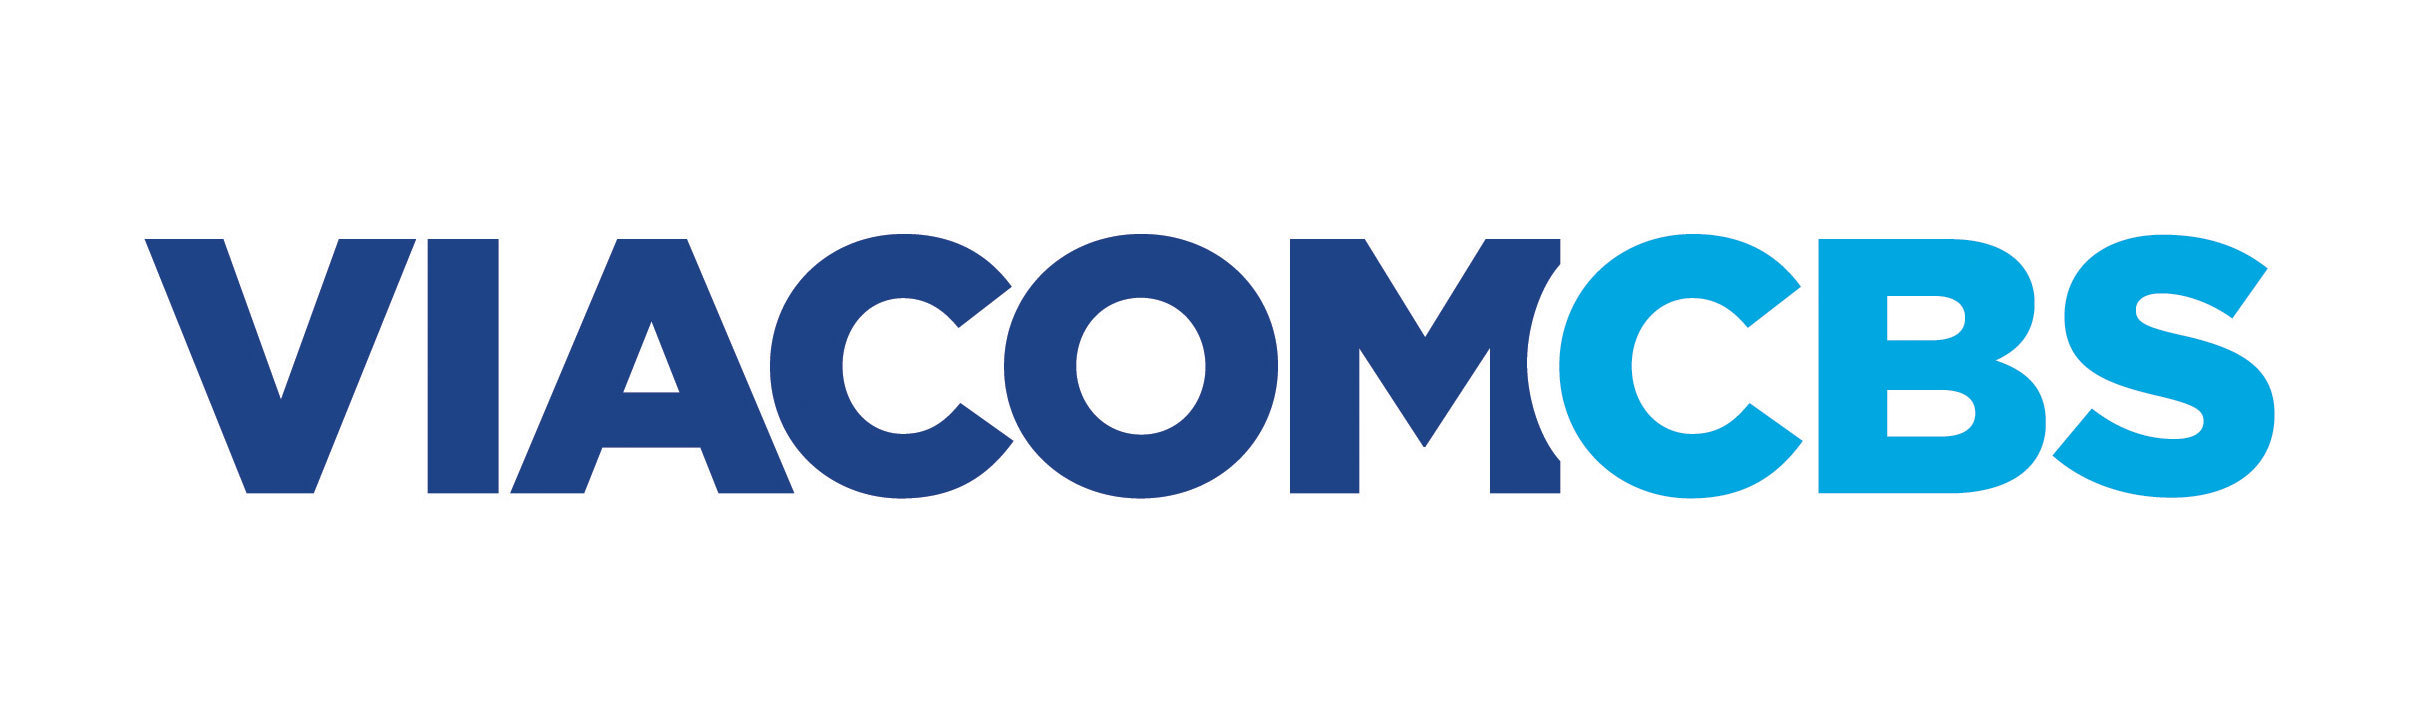 ViacomCBS Enters Strategic NFT Partnership with RECUR | Business Wire